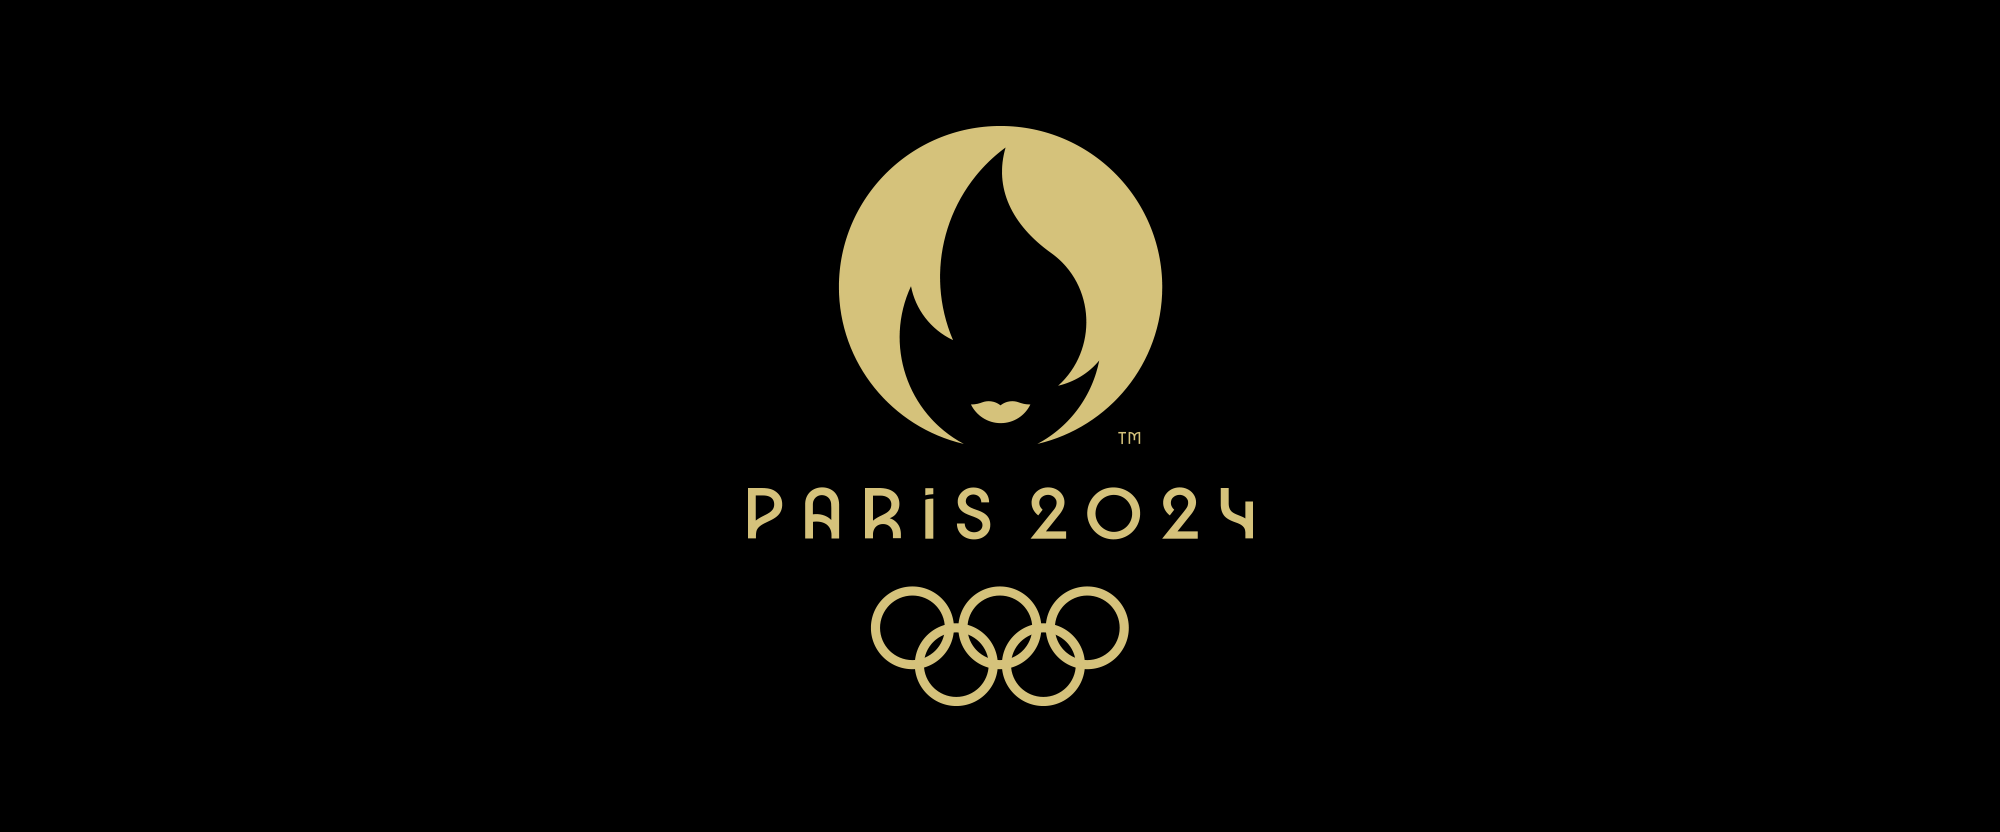 Noted New Emblem for 2024 Summer Olympics by Royalties Ecobranding